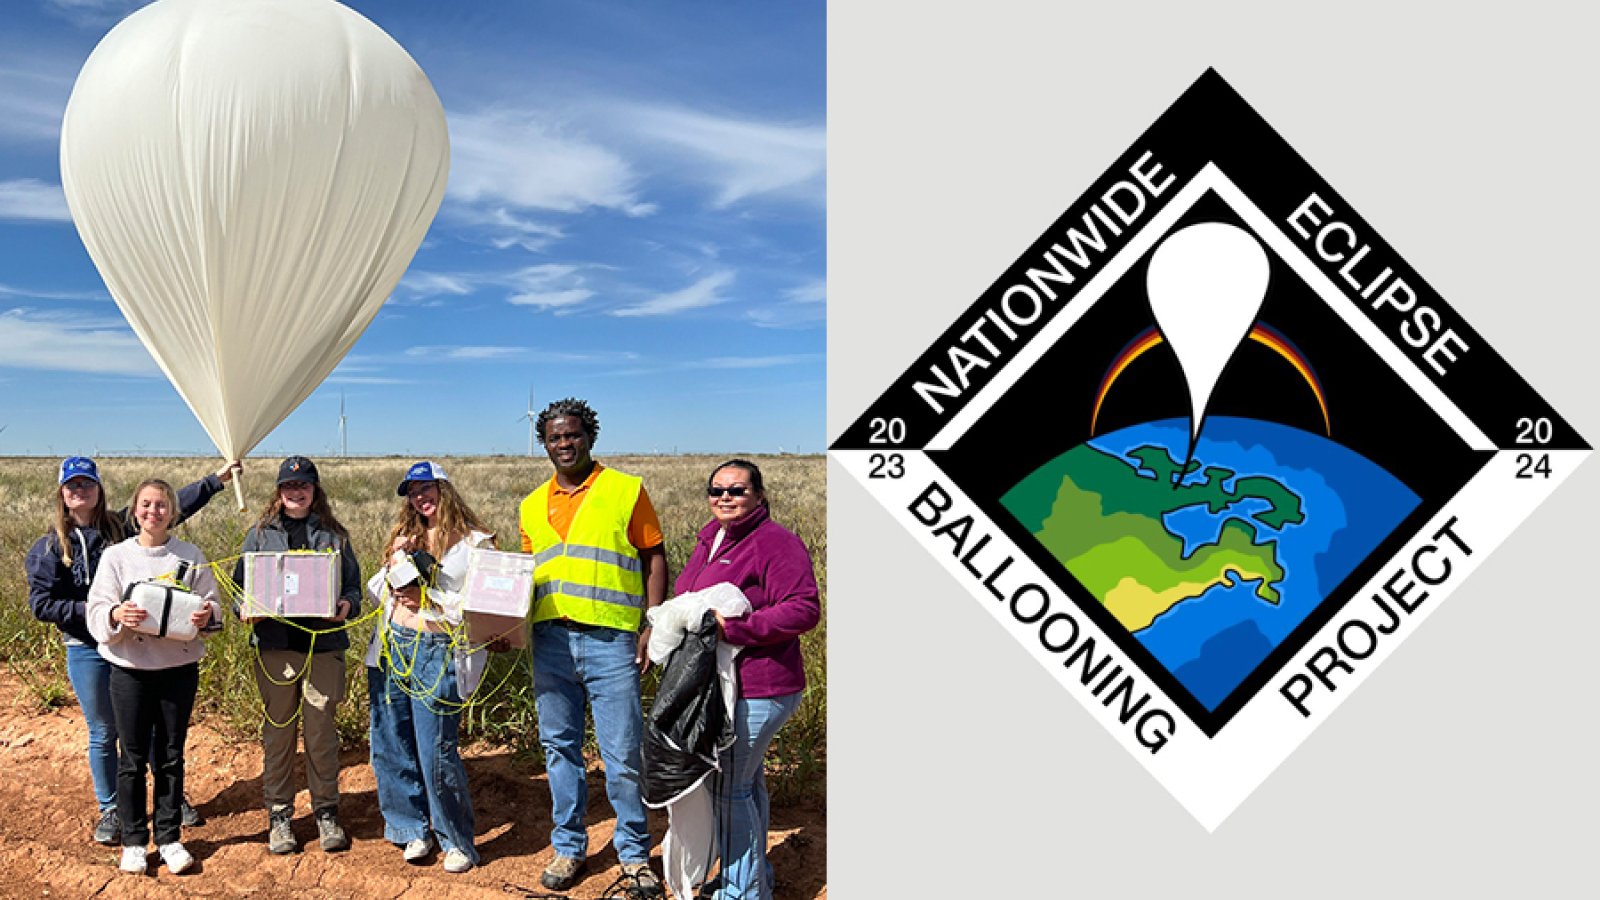 Nebraska AXP team members (left) launched balloons in Roswell, New Mexico during the October 2023 annular eclipse and will launch two balloons on April 8, 2024 during a total eclipse as part of the Nationwide Eclipse Ballooning Project, for which mechanical engineering student Isaac Cade designed the logo (right).